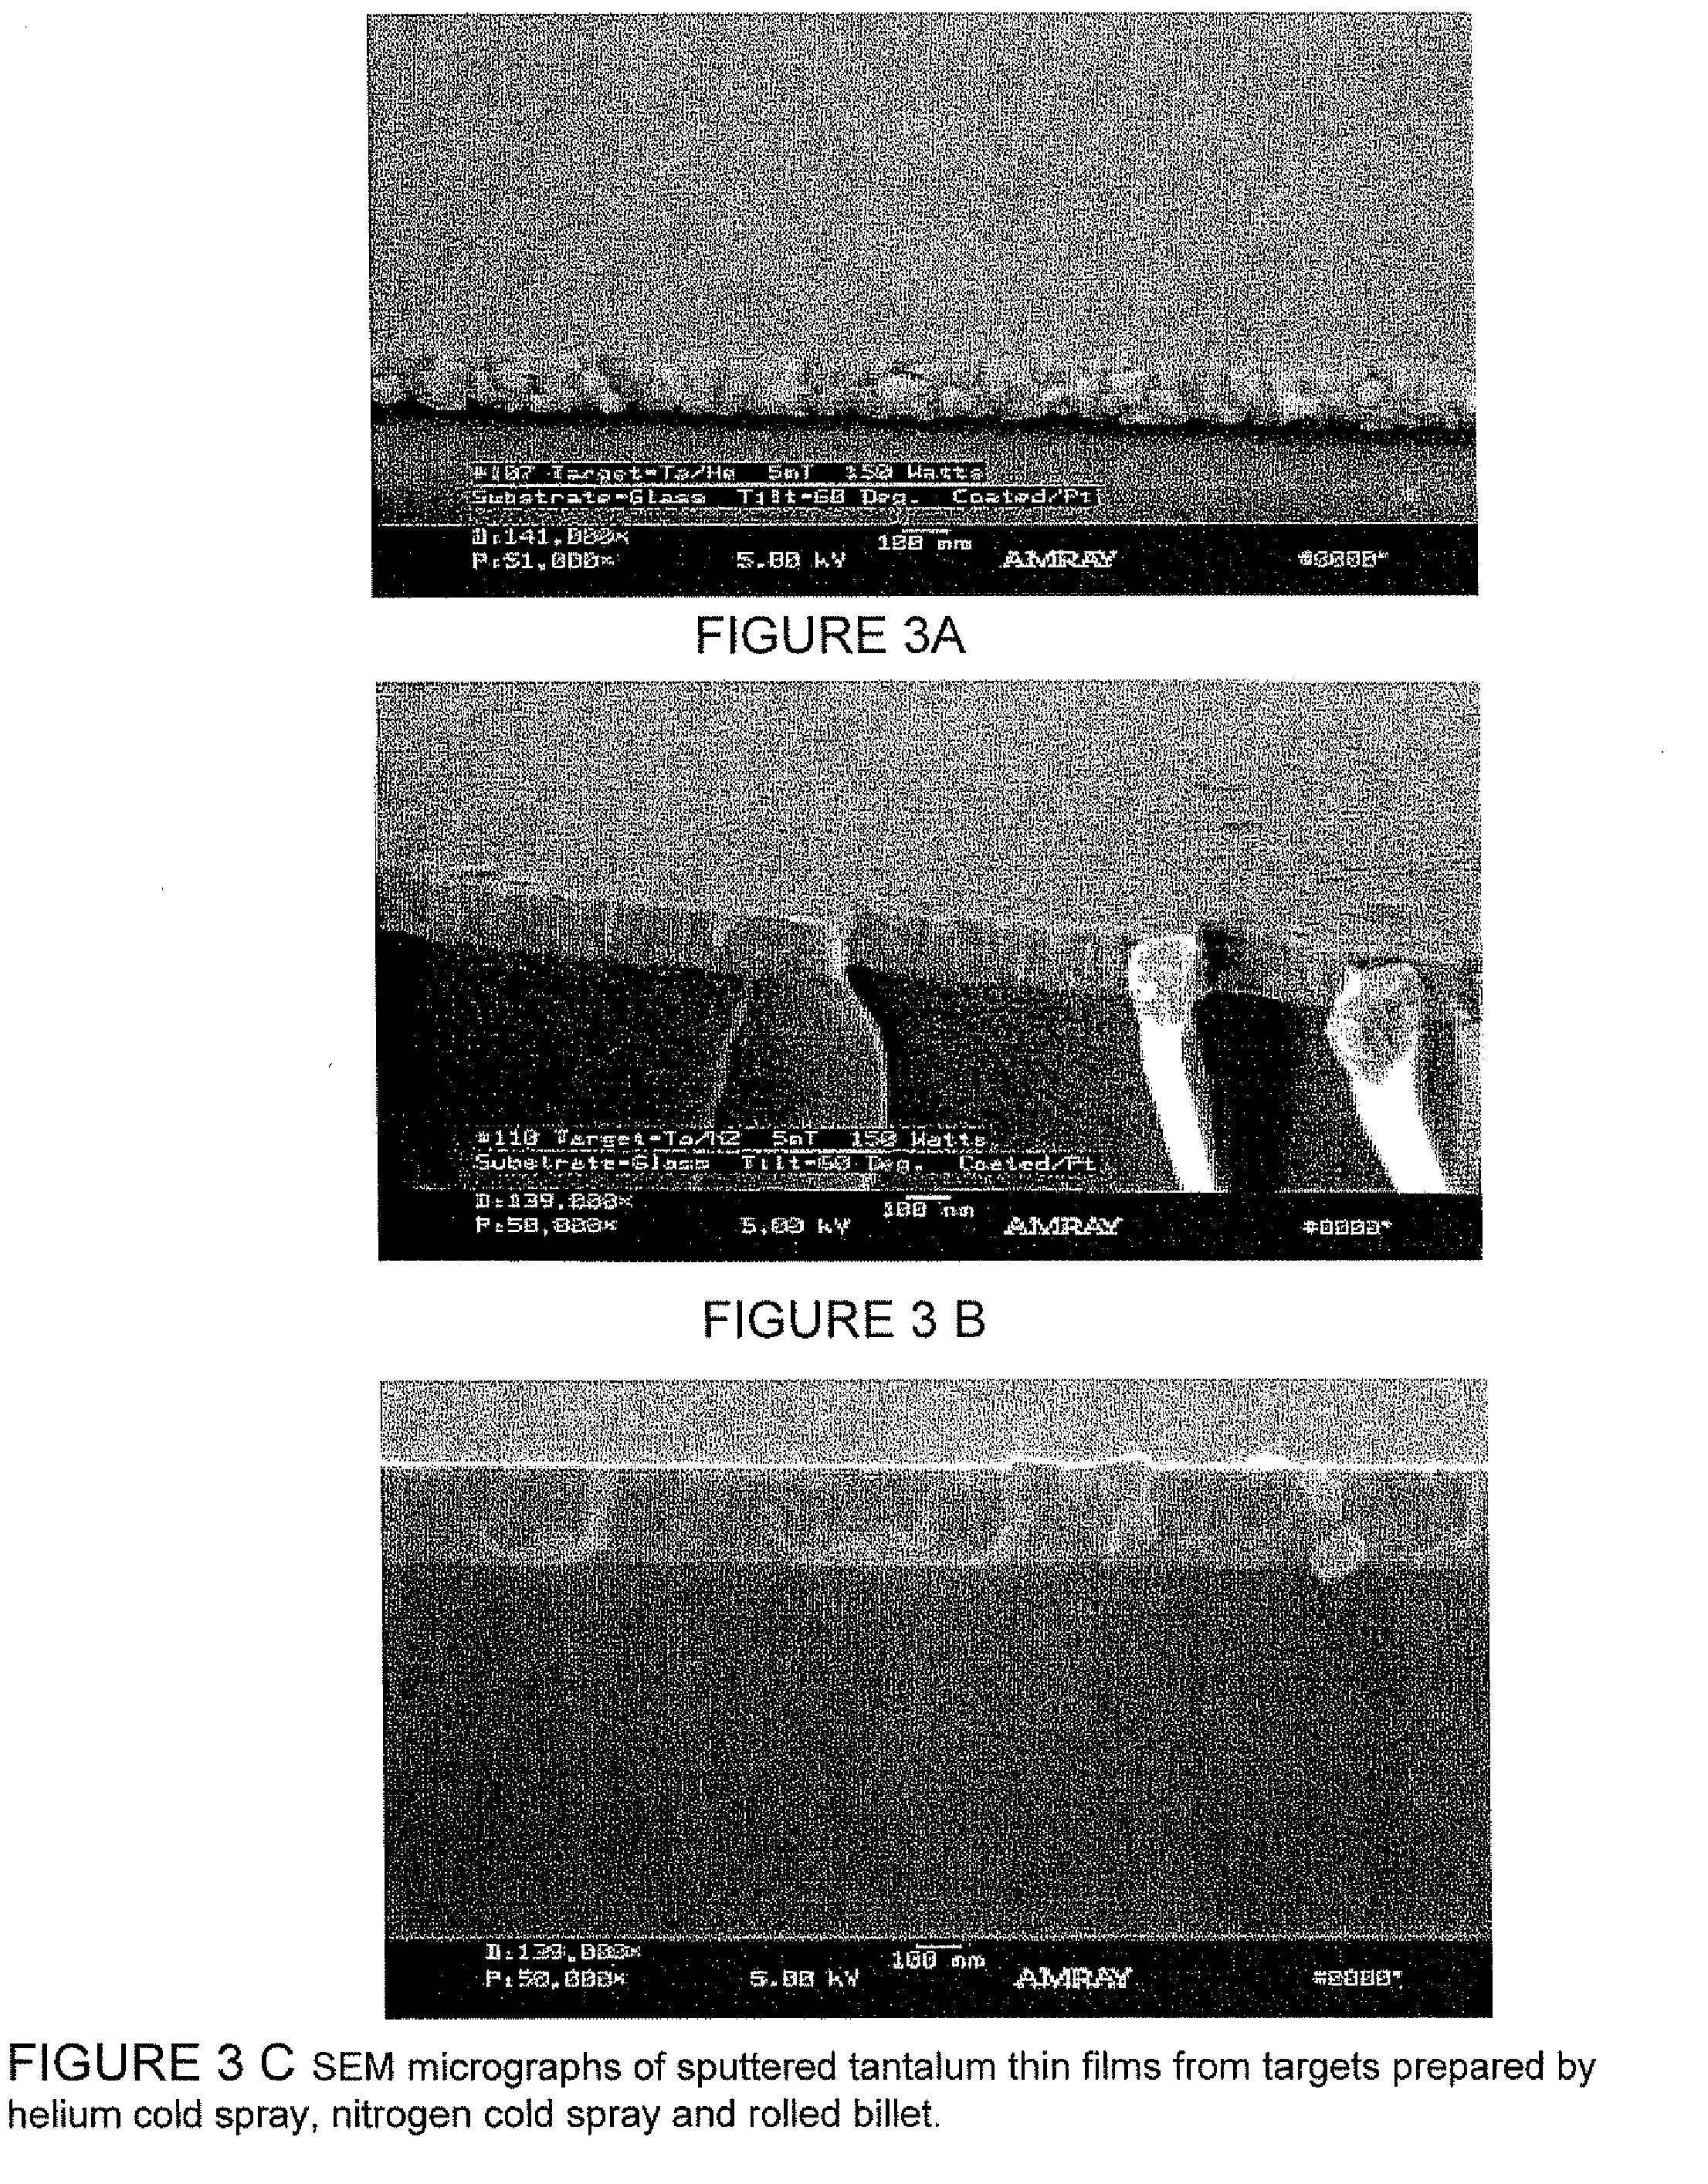 Fine Grained, Non Banded, Refractory Metal Sputtering Targets with a Uniformly Random Crystallographic Orientation, Method for Making Such Film, and Thin Film Based Devices and Products Made Therefrom